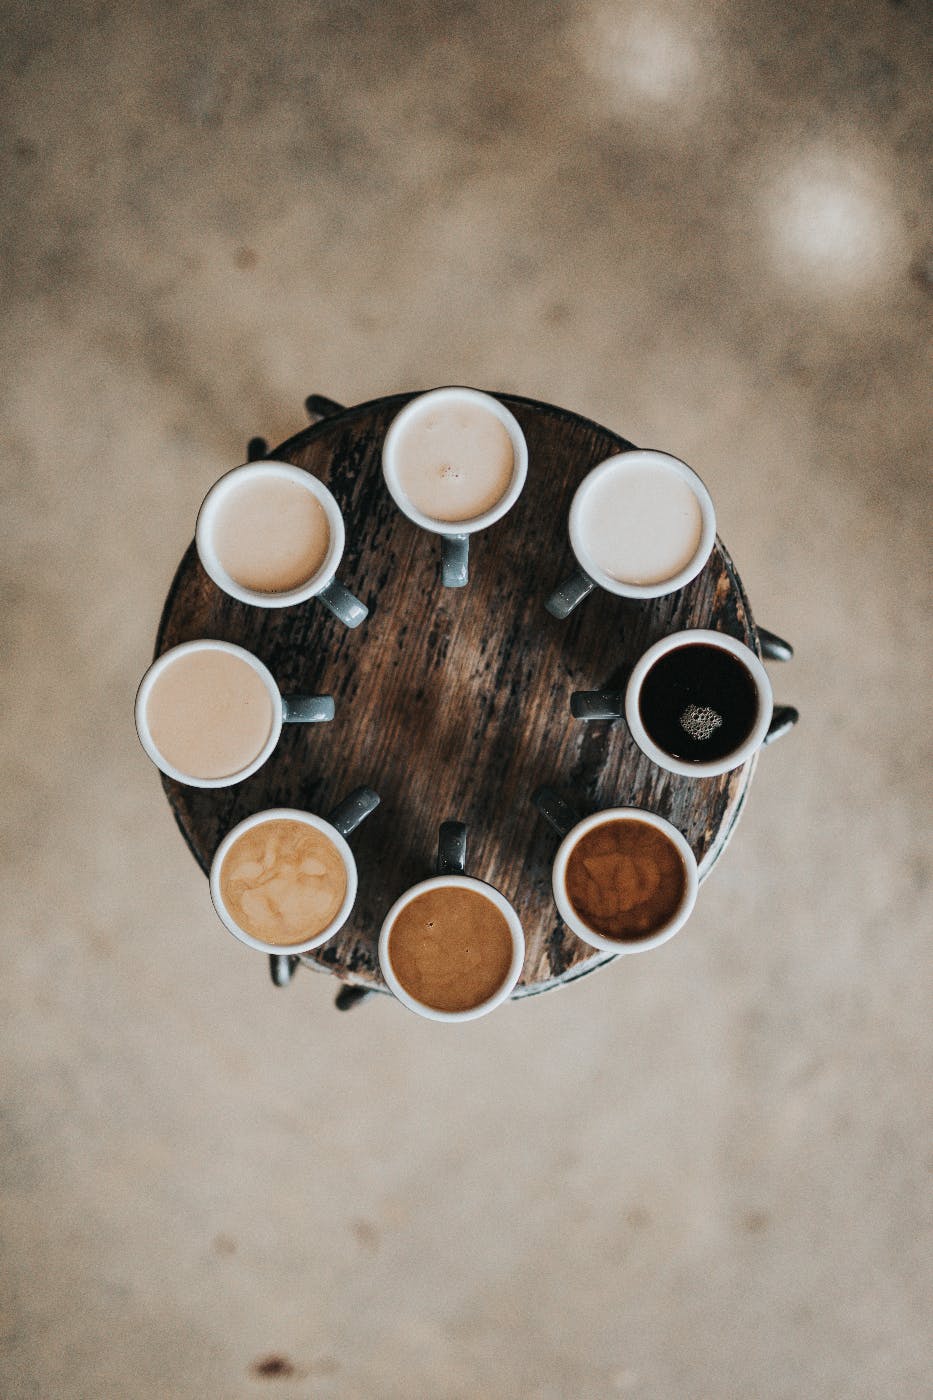  8 cups of coffee in varying colors in a circle on a round table